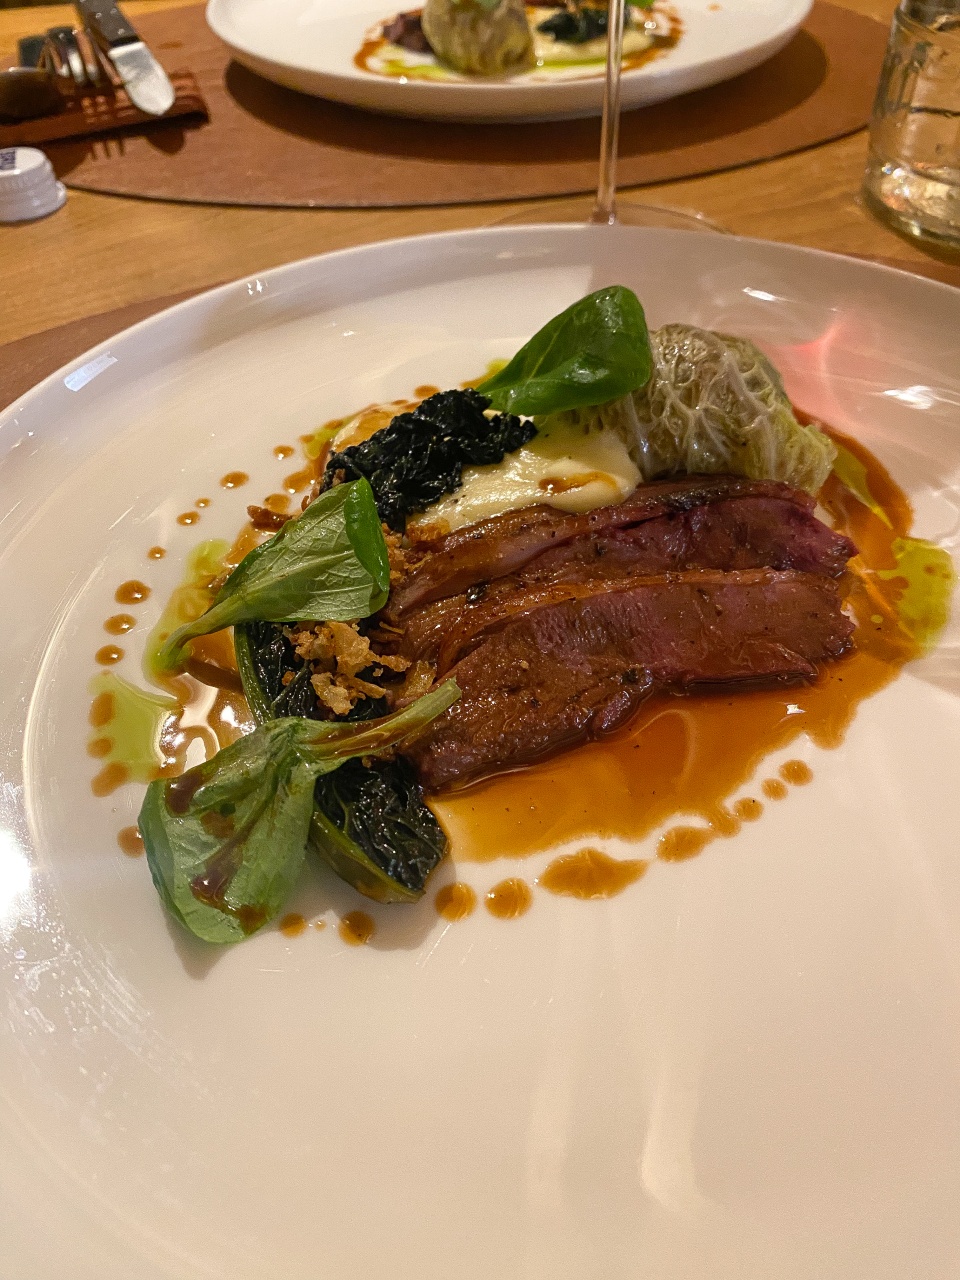 A tasty-looking dish served on a white plate. It appears to be a piece of roasted meat, possibly duck, garnished with a creamy sauce and crispy toppings. On the side are added green leaves and cooked vegetables, probably spinach or a similar leafy vegetable. The whole thing is complemented by a dainty gravy or sauce artistically drizzled around the meat. The dish exudes craftsmanship and sophistication, typical of a high-end restaurant.